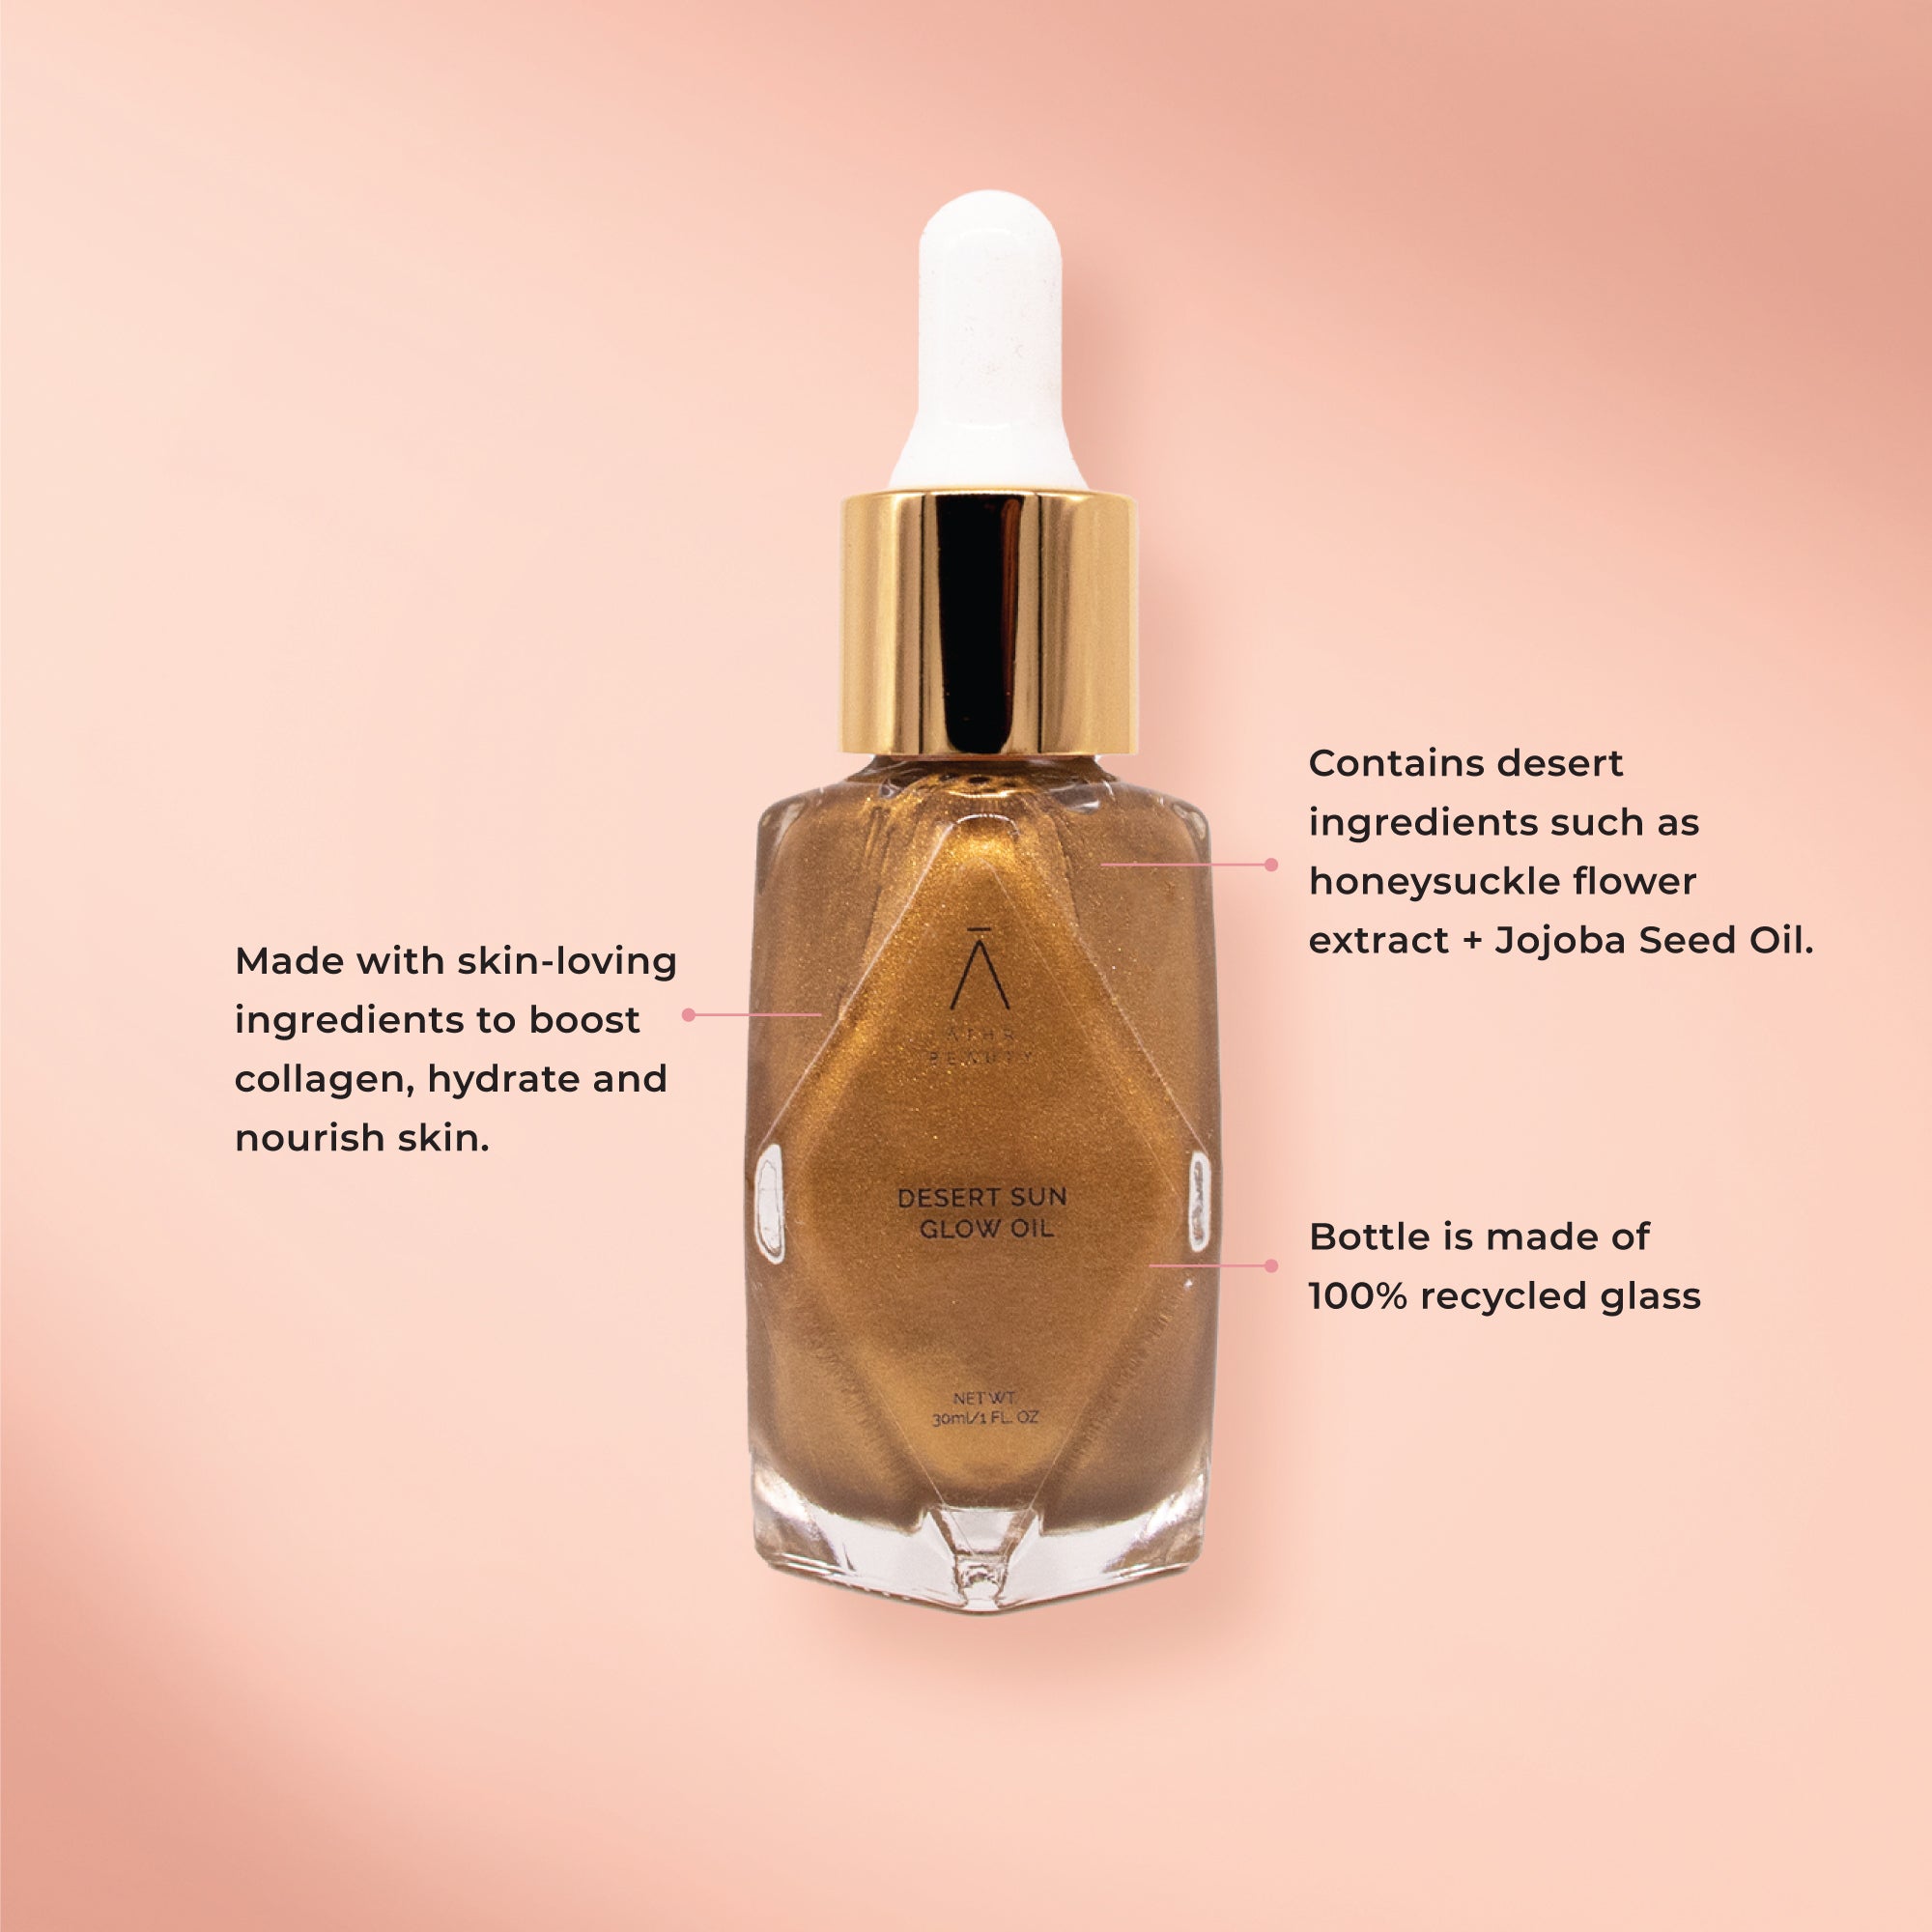 Made with skin-loving ingredients to boost collagen, hydrate and nourish skin; Contains desert-derived ingredients like Honeysuckle Flower Extract and Jojoba Seed Oil; Bottle is made out of 100% recycled glass